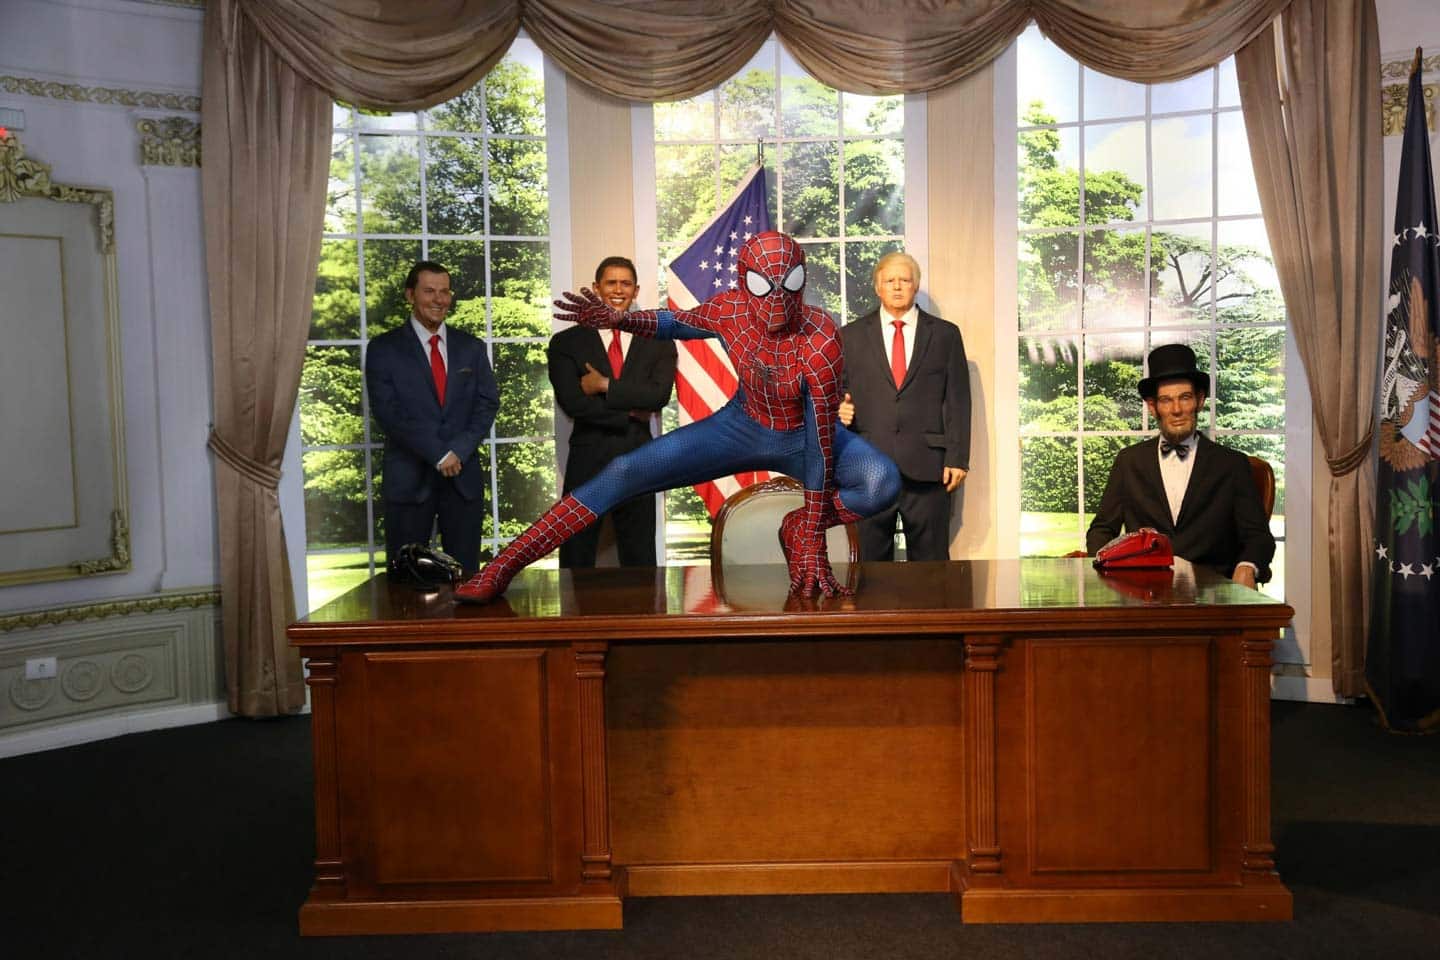 Spiderman and American presidents in a replica of the White House at Dreamland Foz do Iguaçu